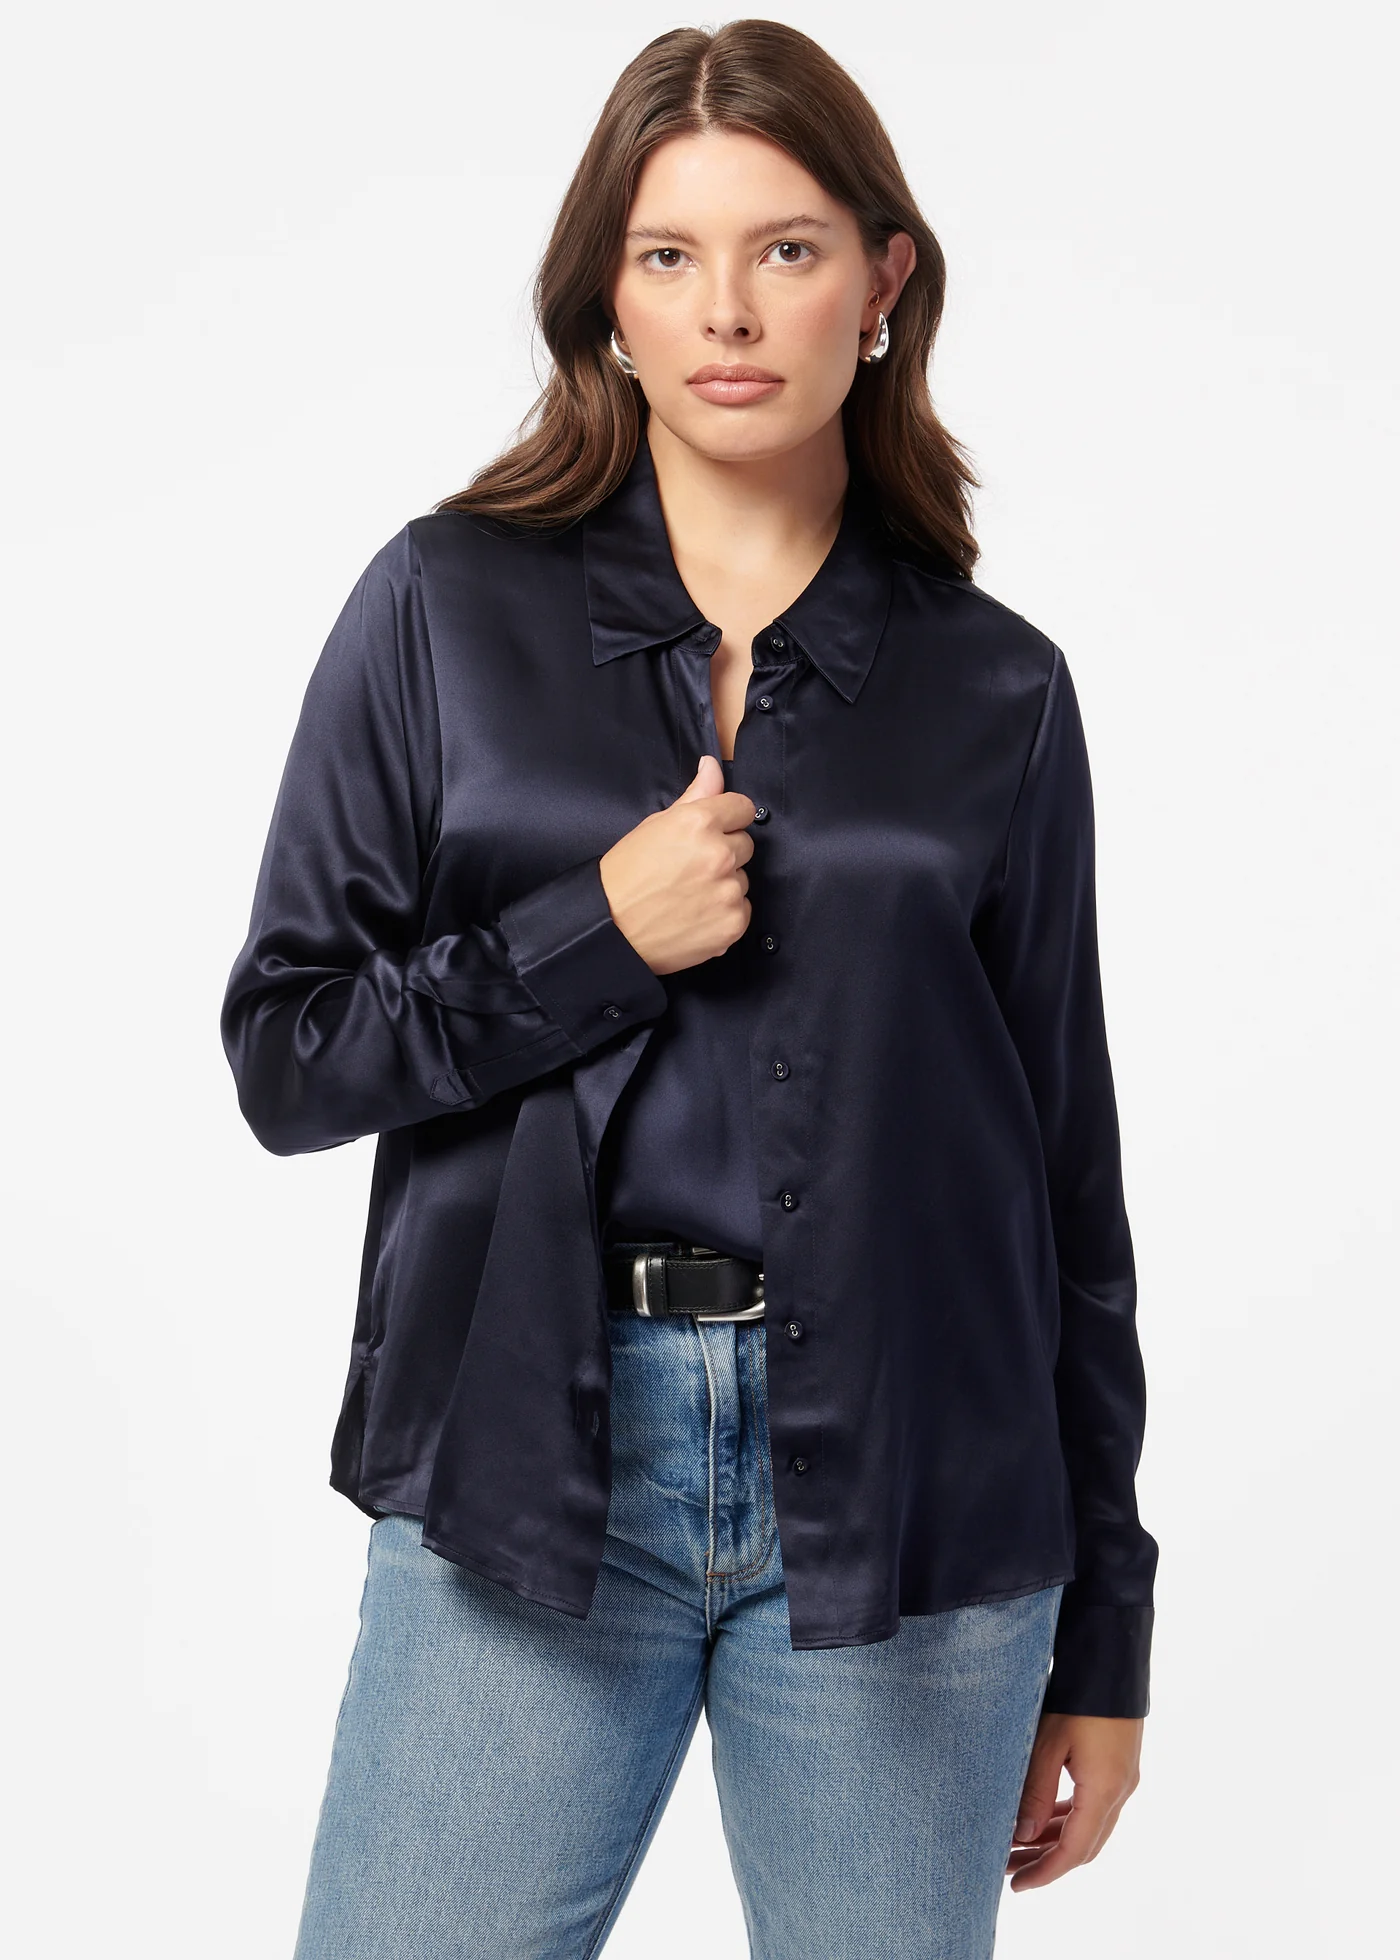 CROSBY BLOUSE IN NAVY - Romi Boutique